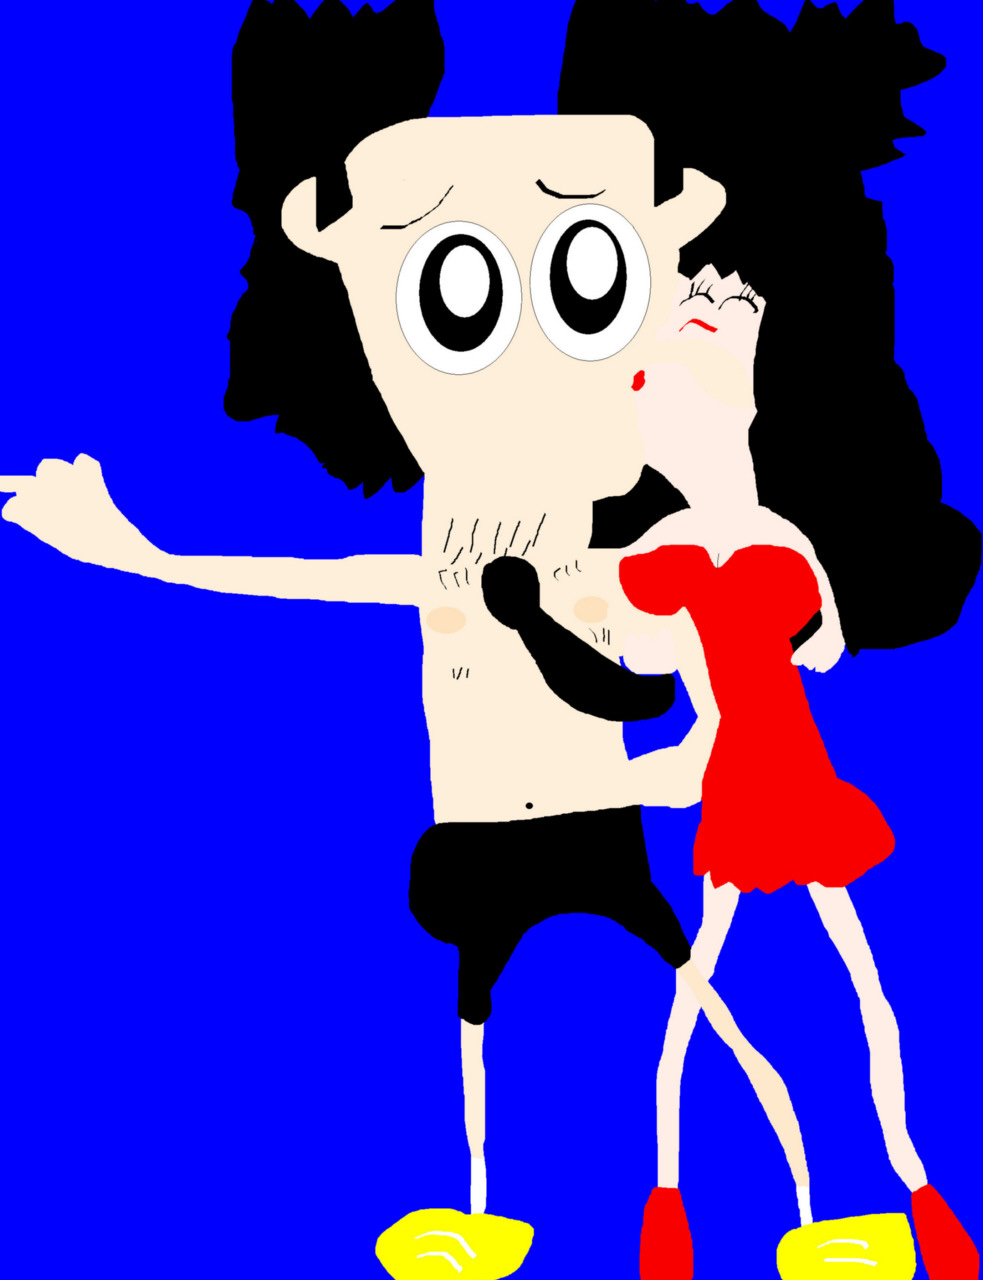 Noodman Shirtless Being Kissed By Darlene Version MS Paint by Falconlobo